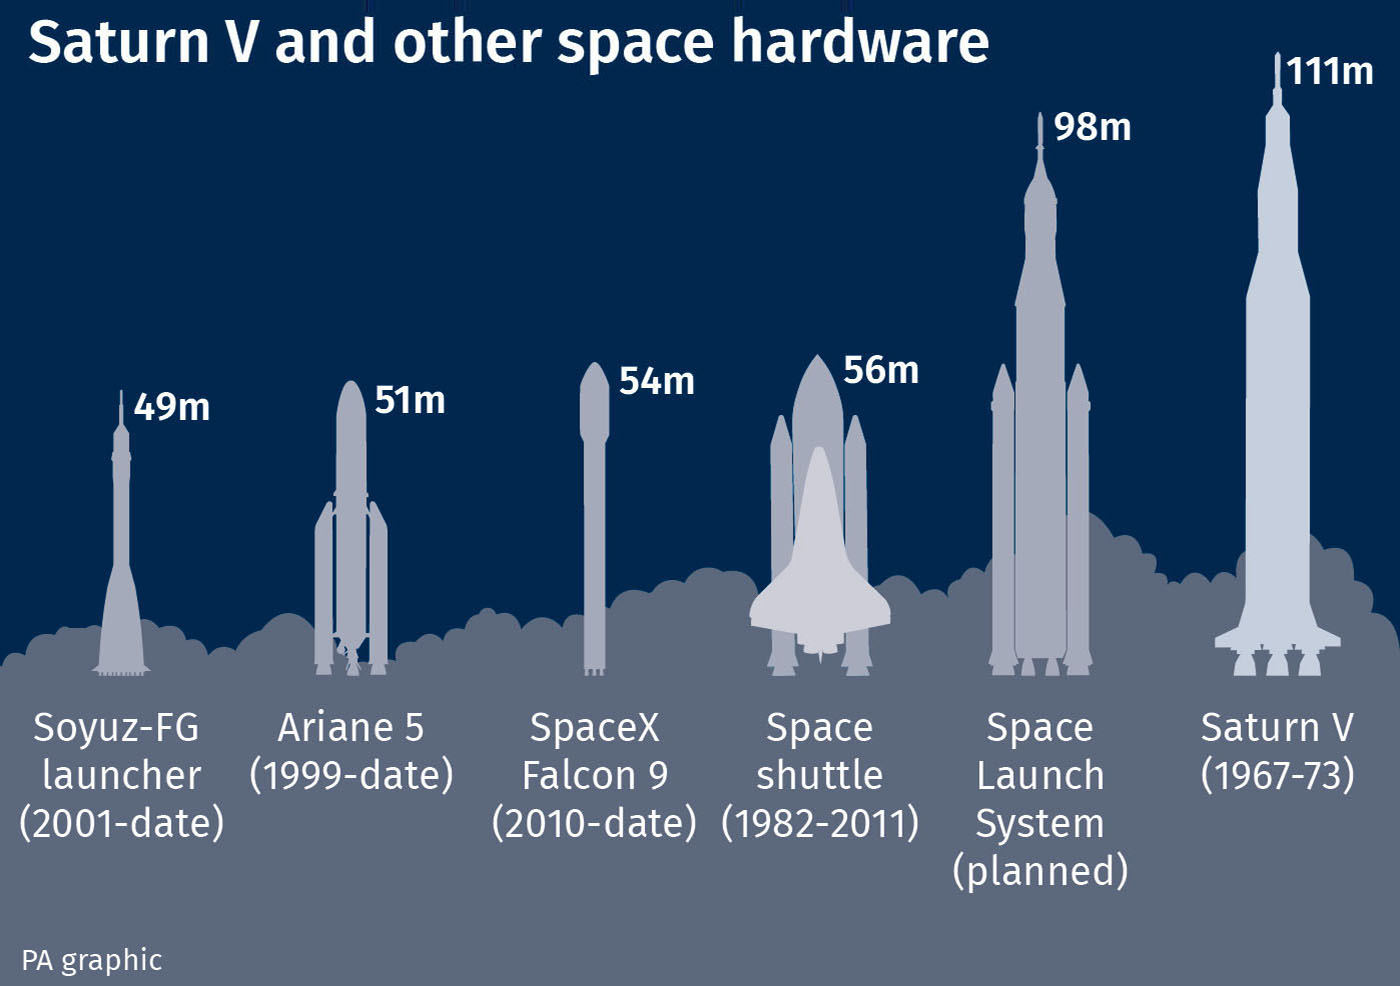 Saturn V and other space hardware